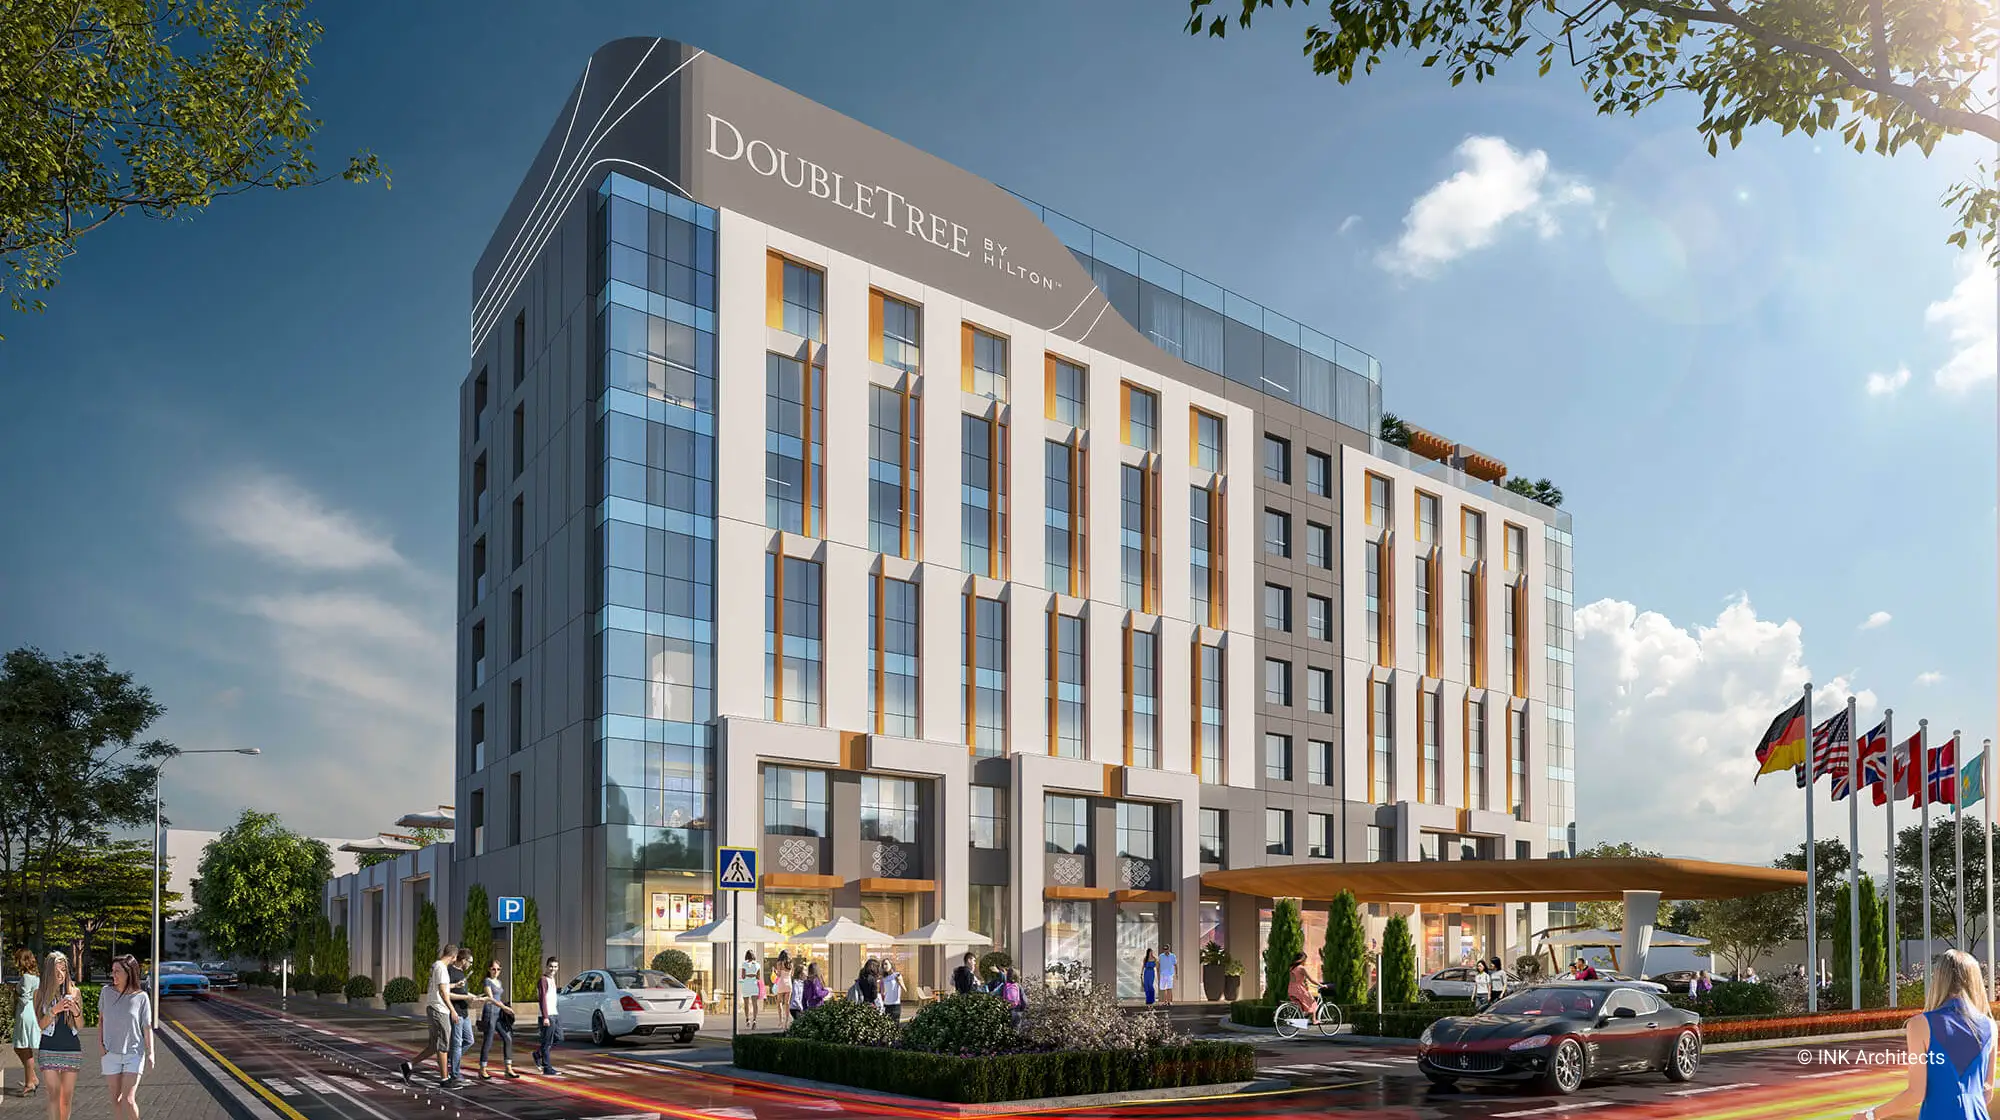 Architectural design of the DoubleTree by Hilton hotel. Architectural design services. Architectural bureau INK Architects